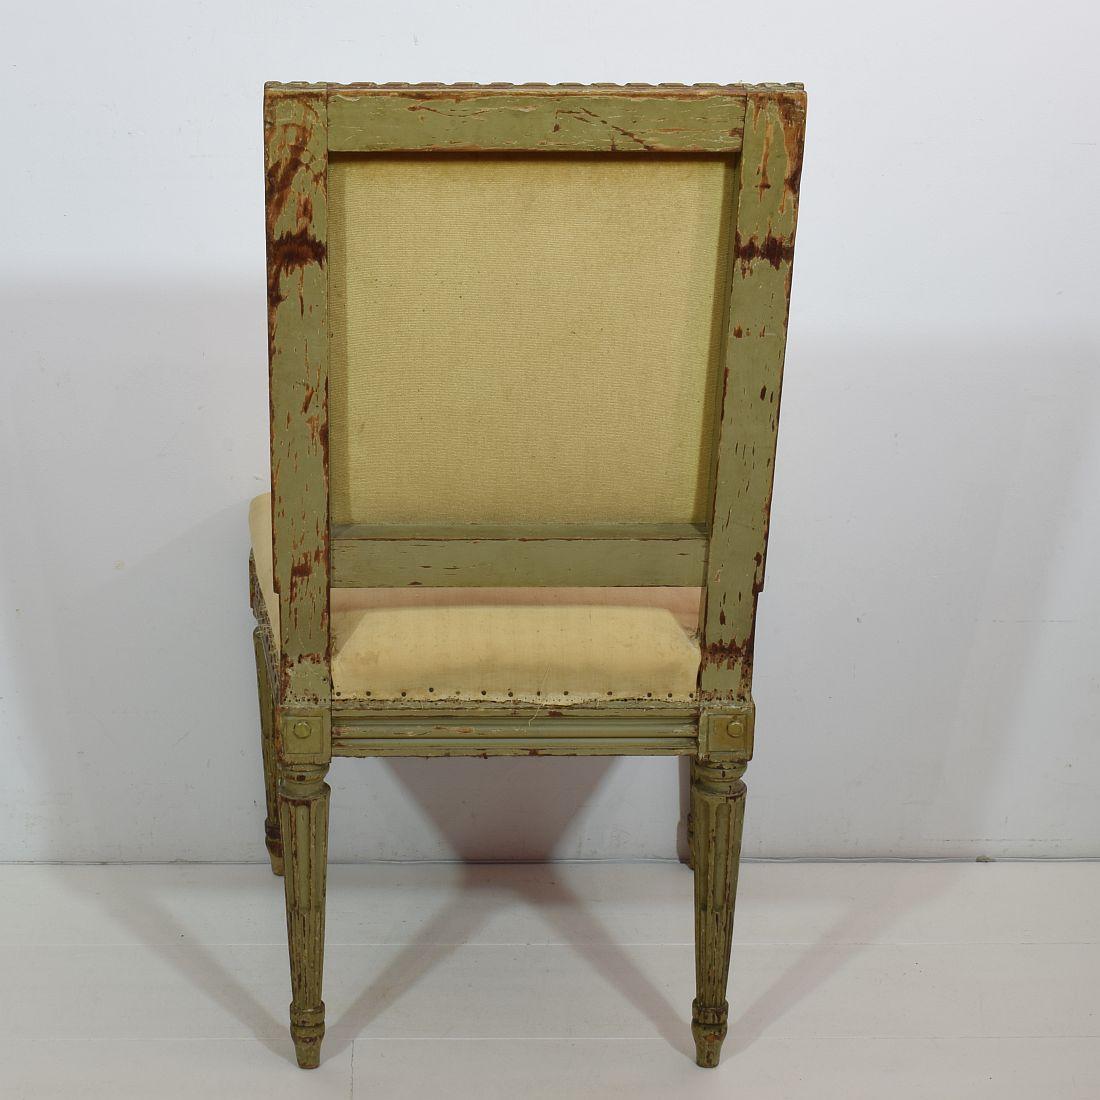 Pair of 19th Century French Painted Louis XVI Style Side Chairs (Geschnitzt)